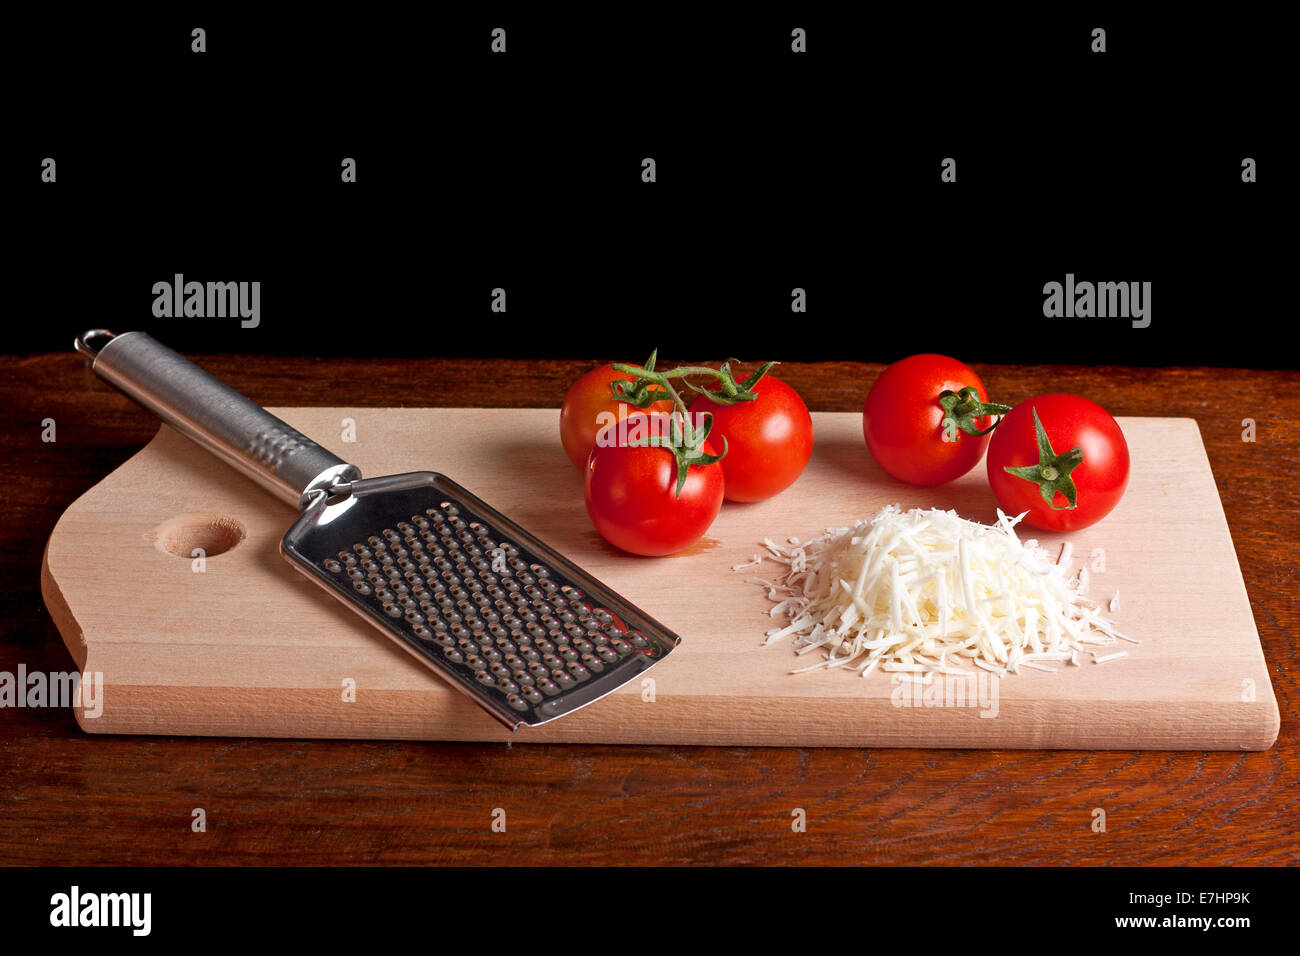 Grated cheese, grater and red tomato on a wood desk with black background Stock Photo